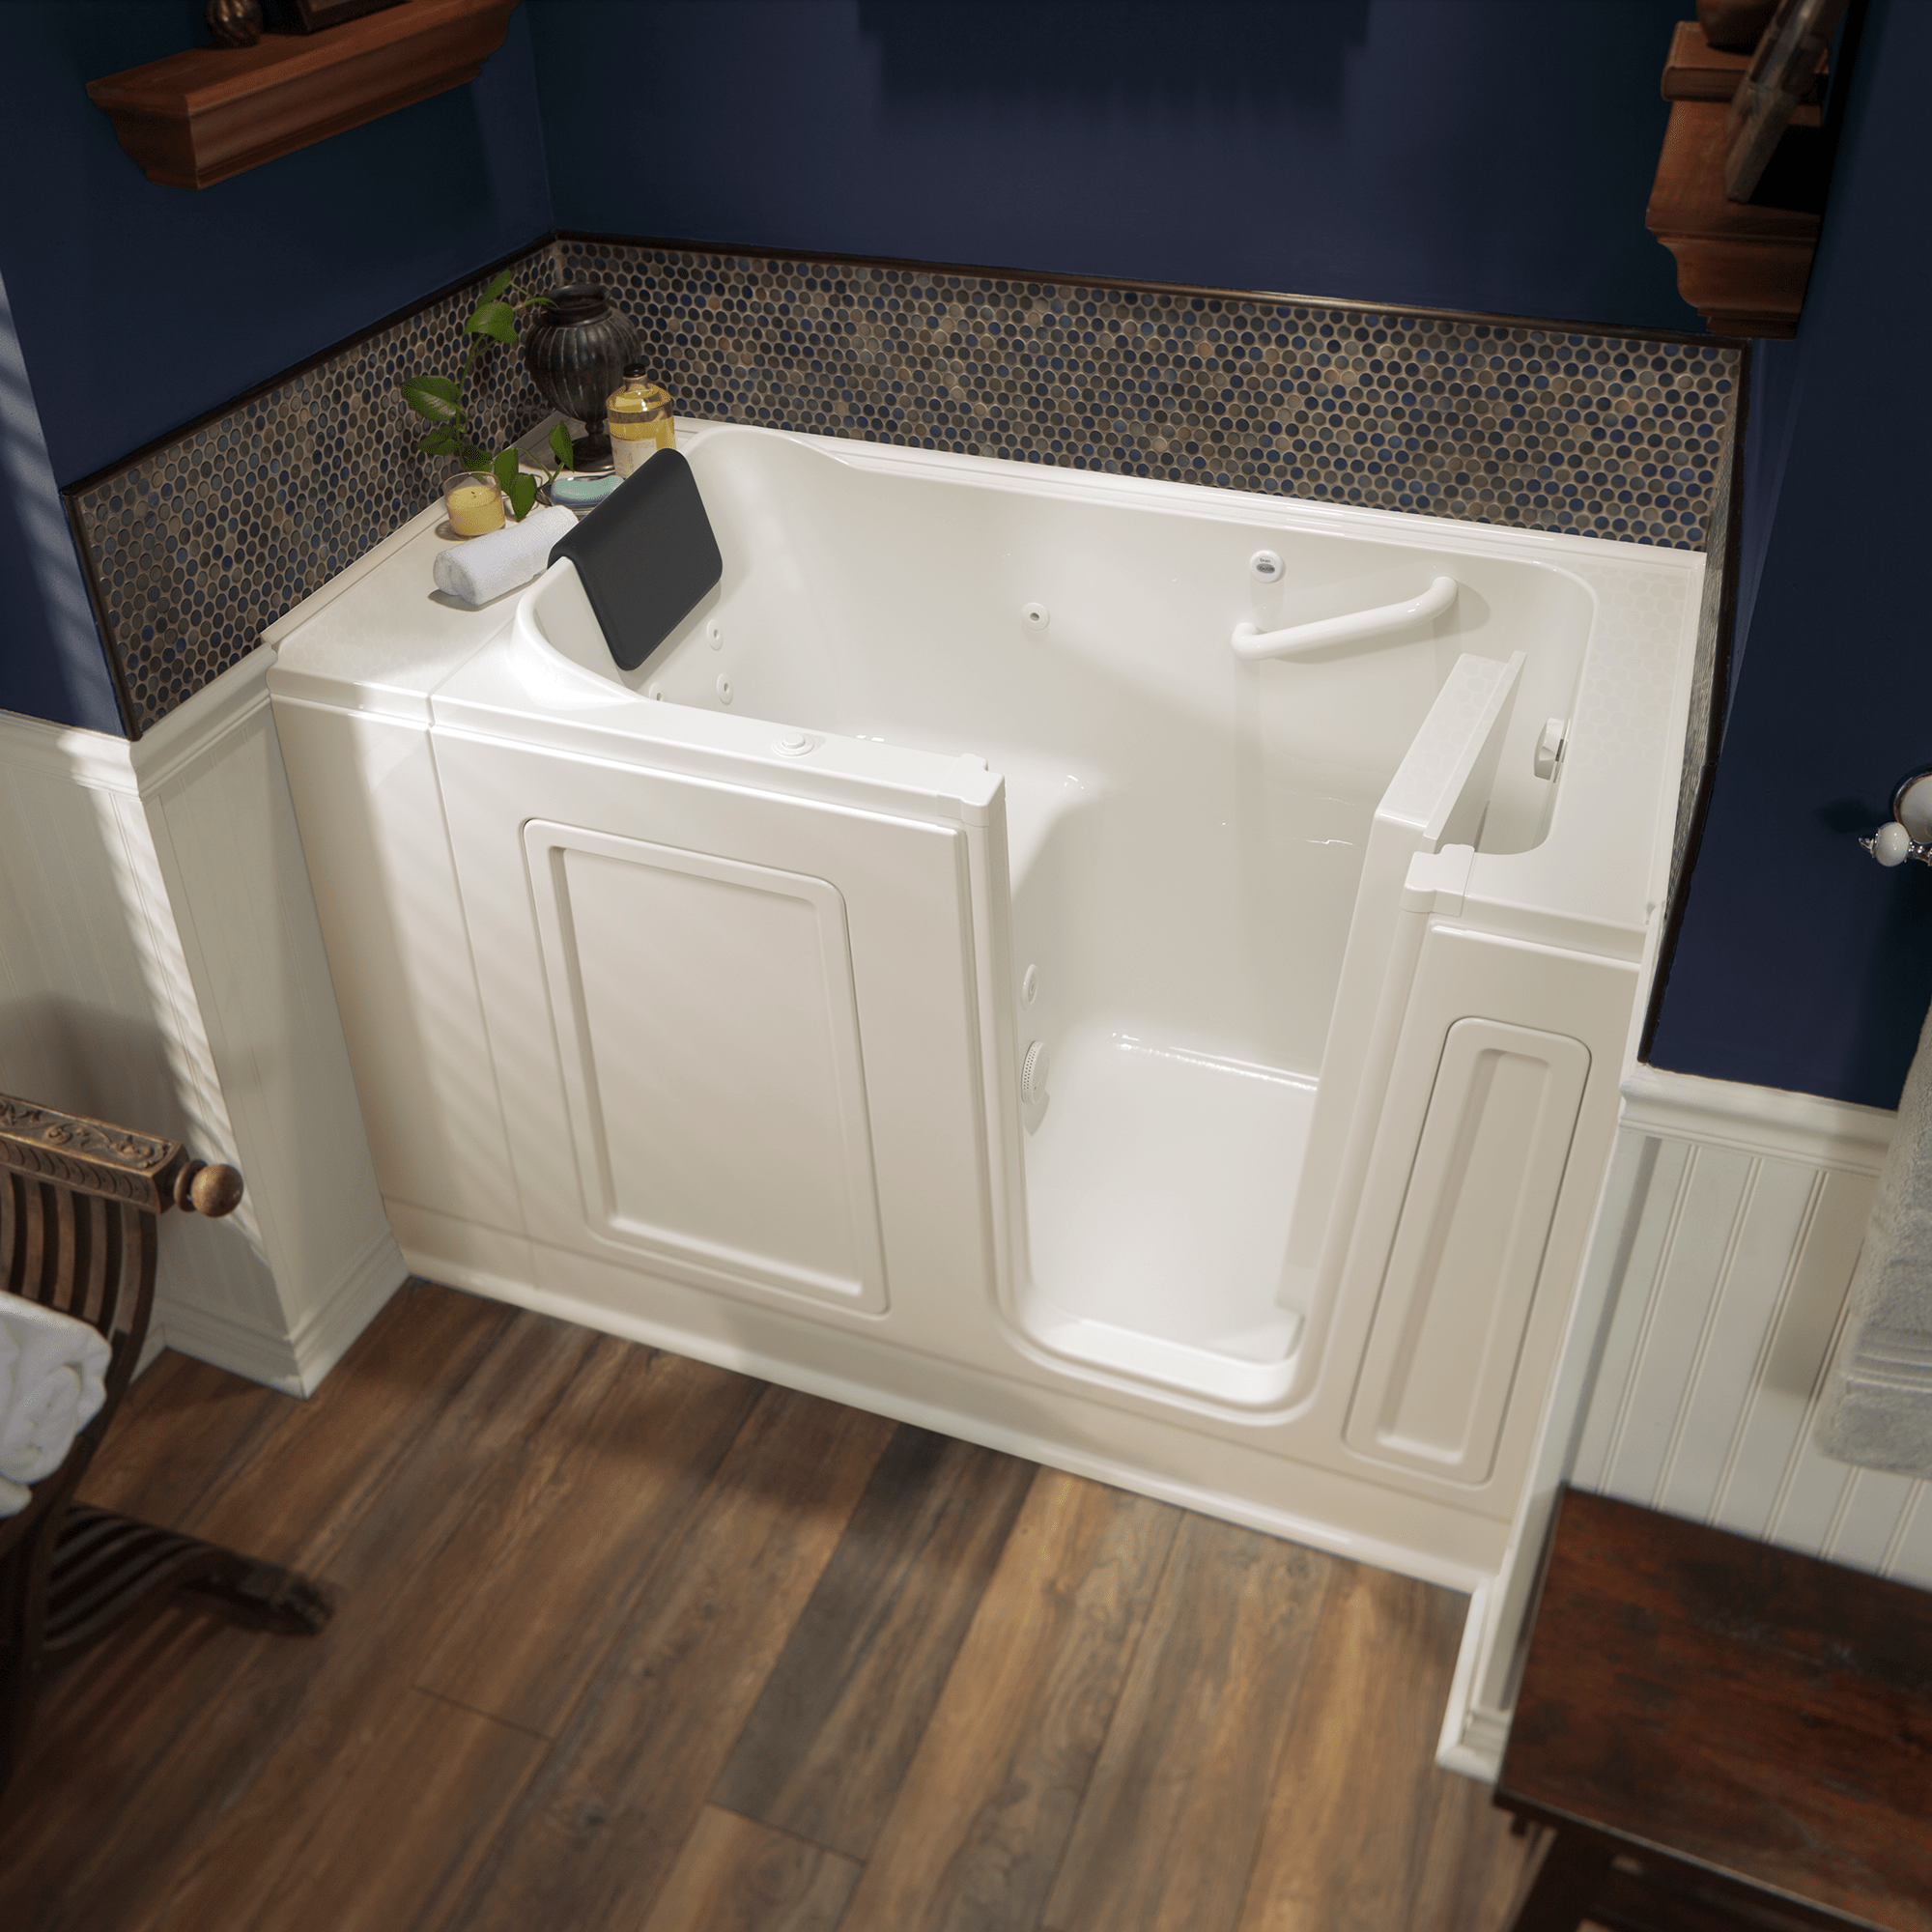 Acrylic Luxury Series 30 x 51 -Inch Walk-in Tub With Whirlpool System - Right-Hand Drain